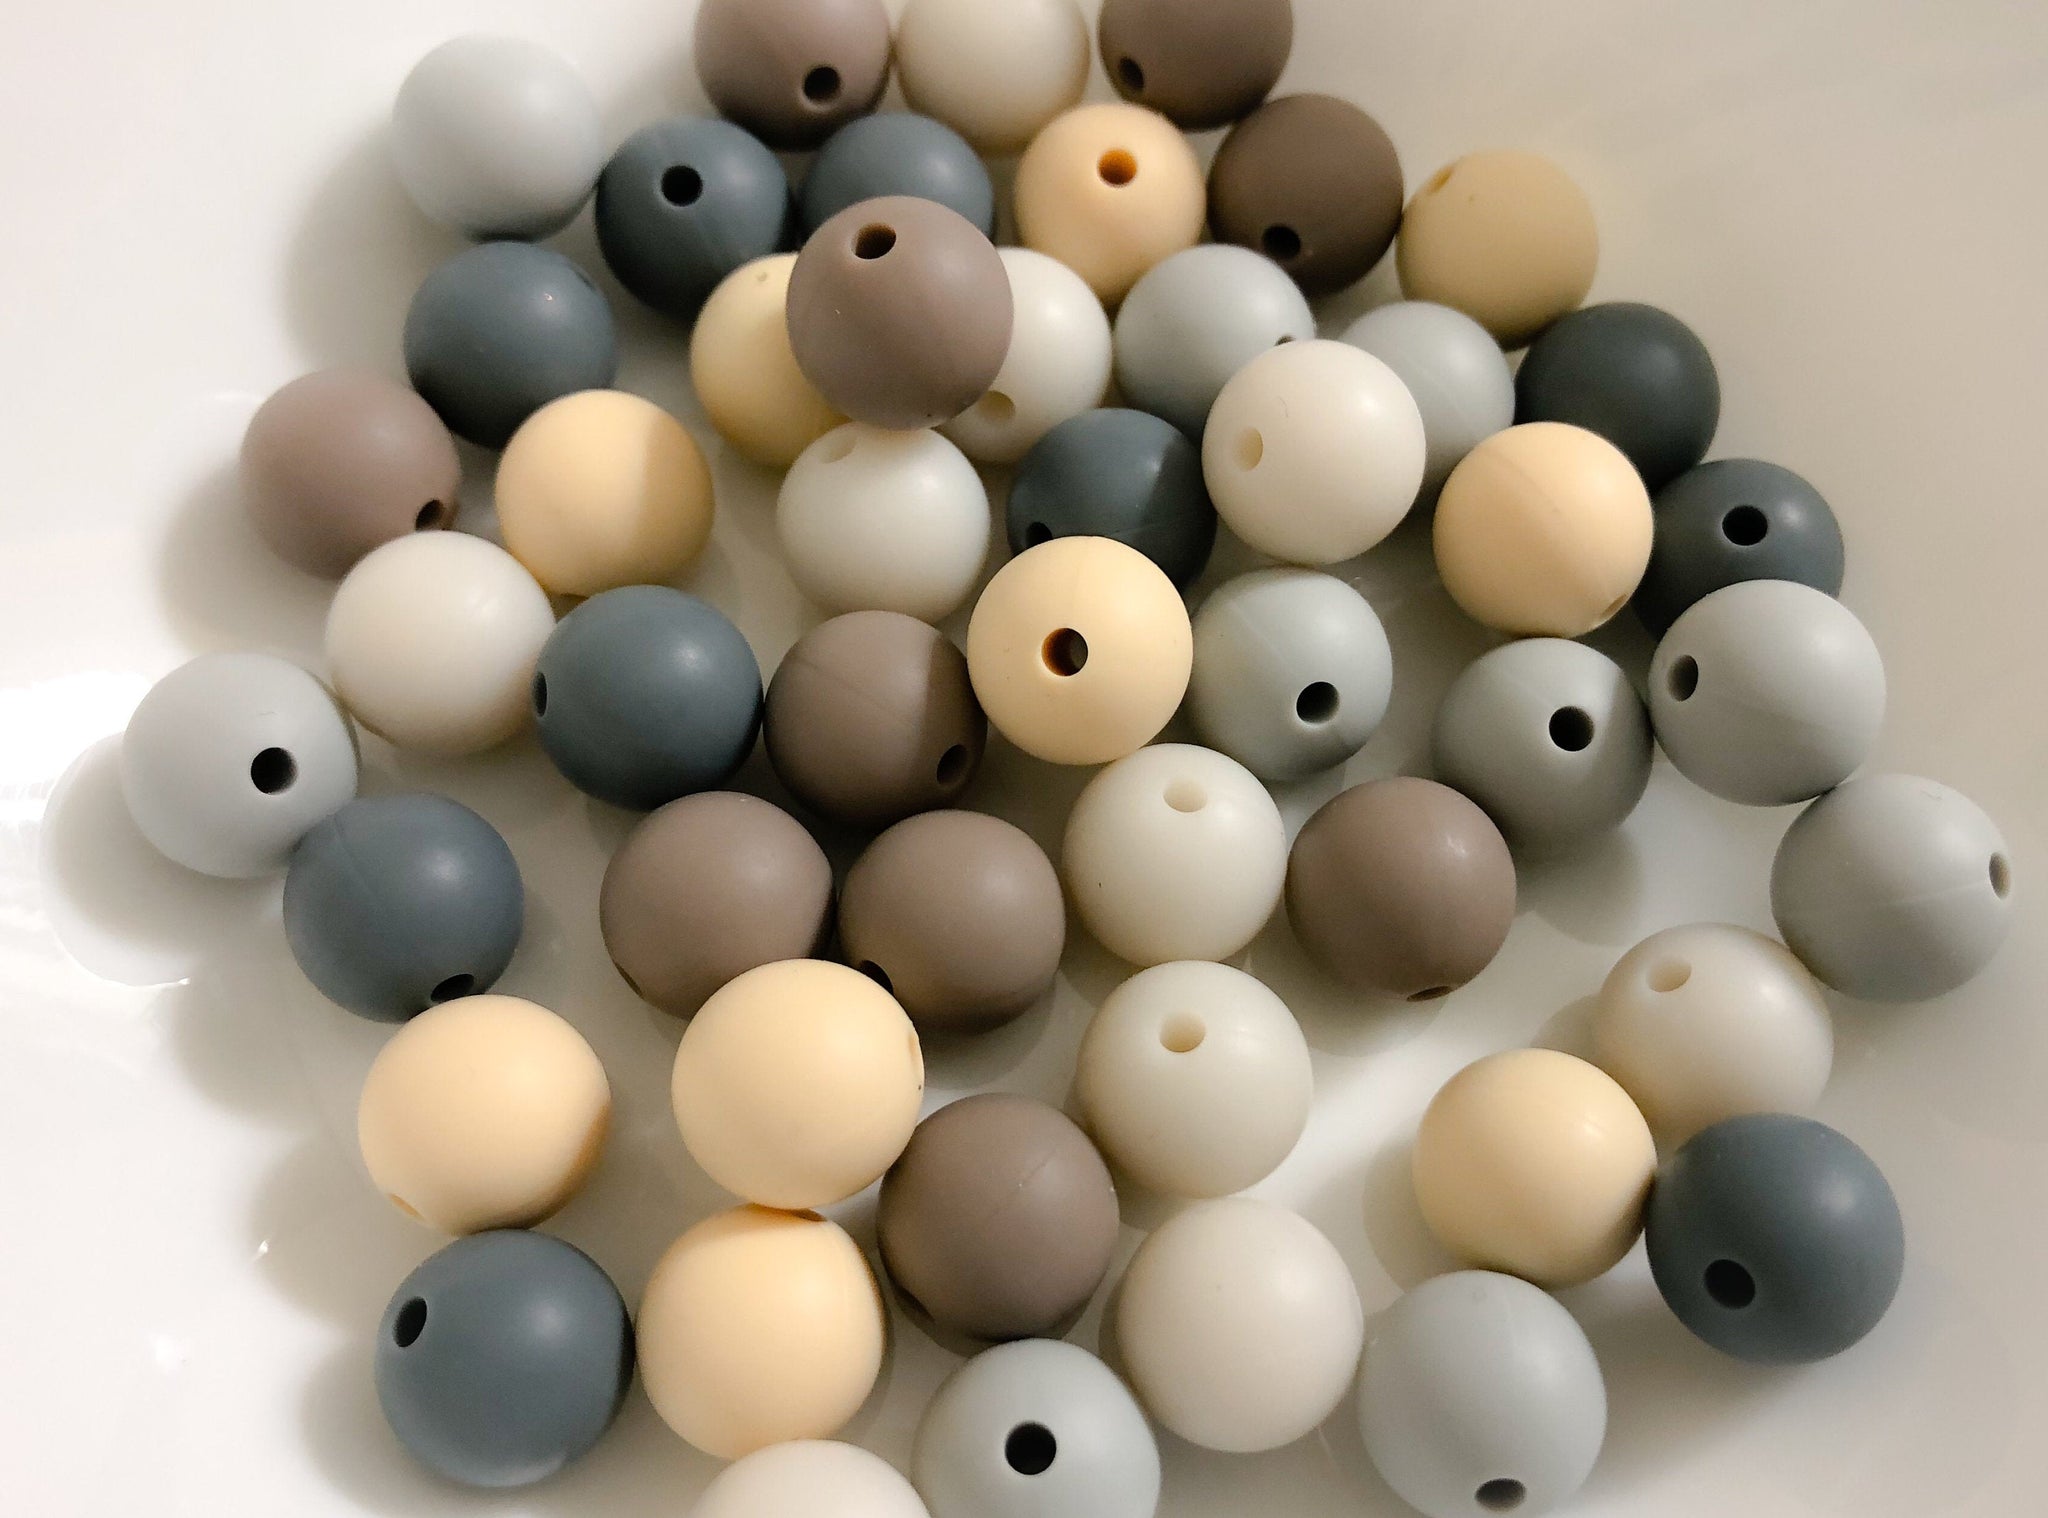 50 Bulk Silicone Beads - Feathers - Seal, Dove, Grey, Cafe, Ivory